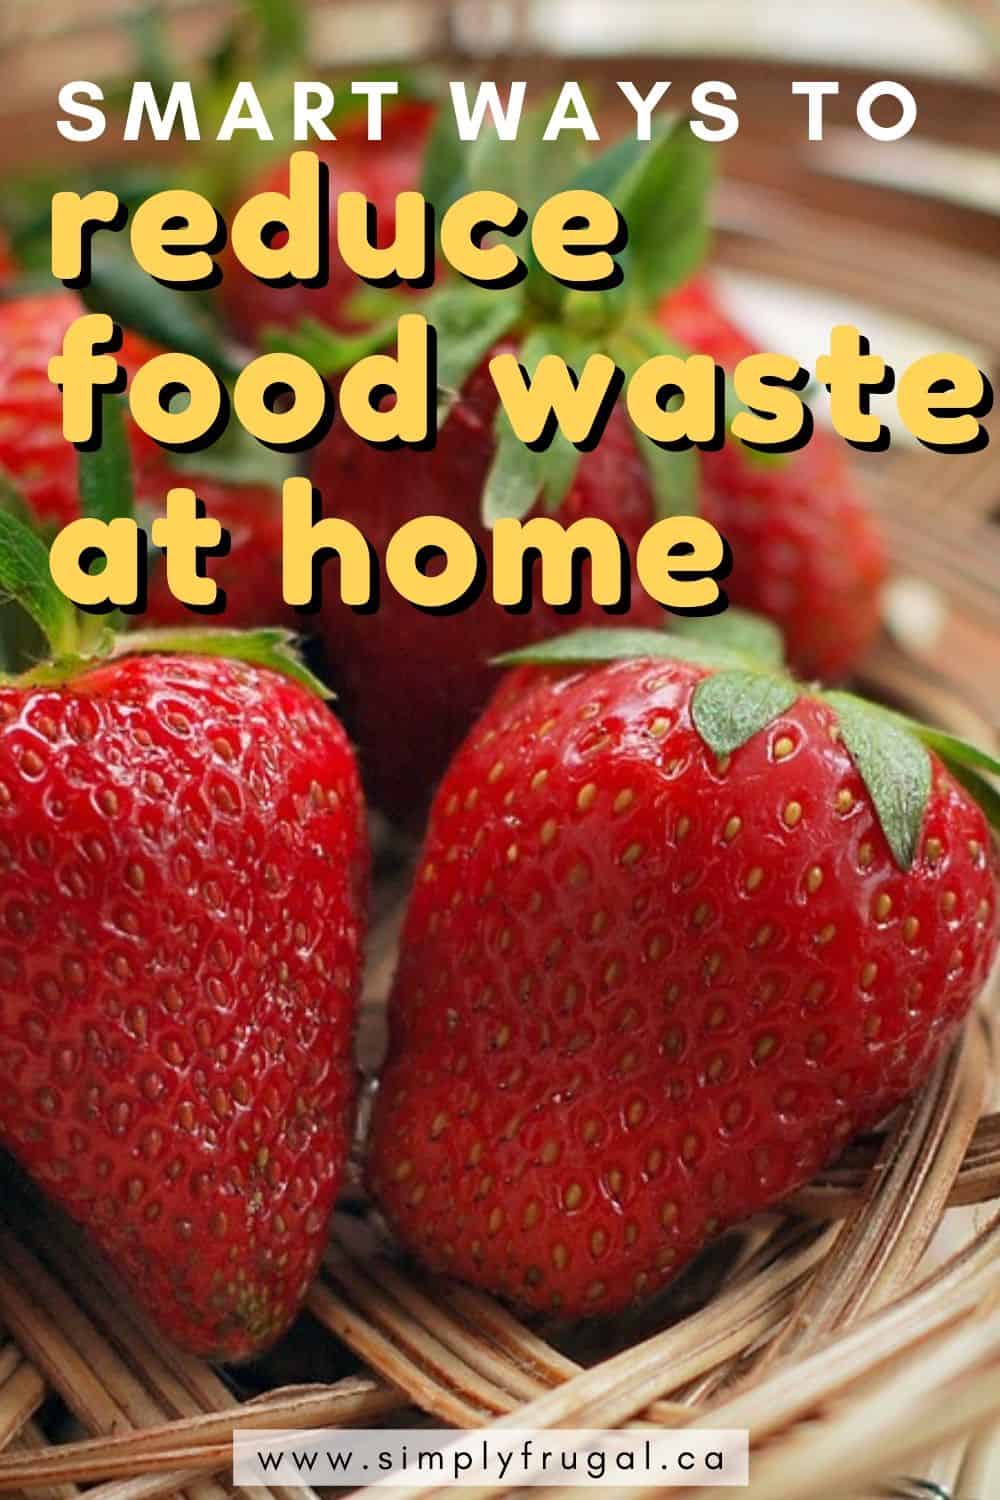 With a little creativity and some smart shopping, it’s possible to reduce food waste at home quite easily. Here are 11 ideas to get you started!